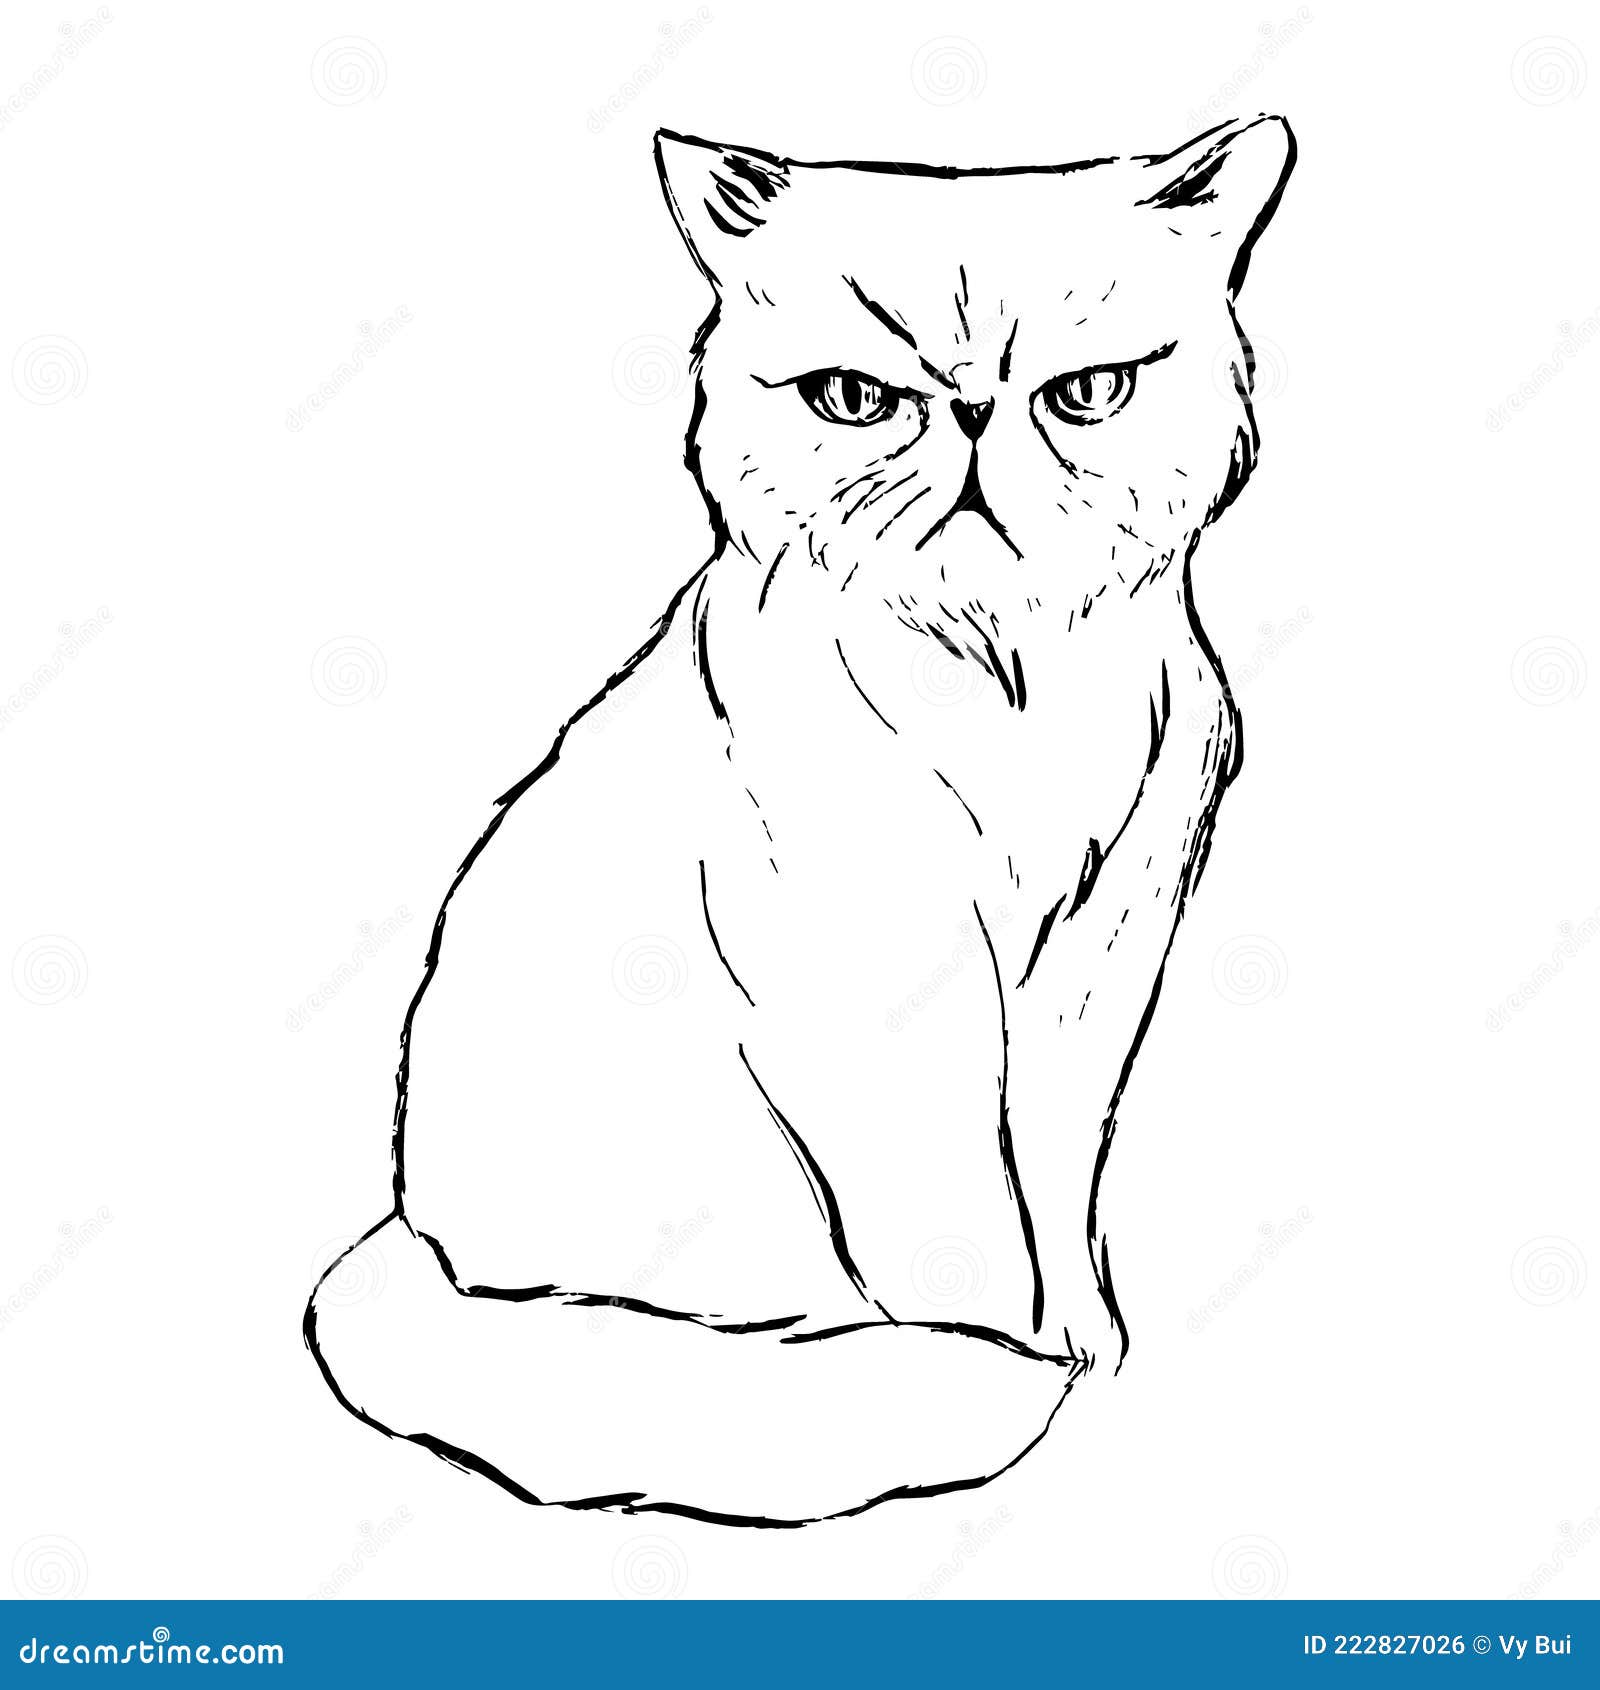 an angry cat illustration. a hand drawn illustration of a wild